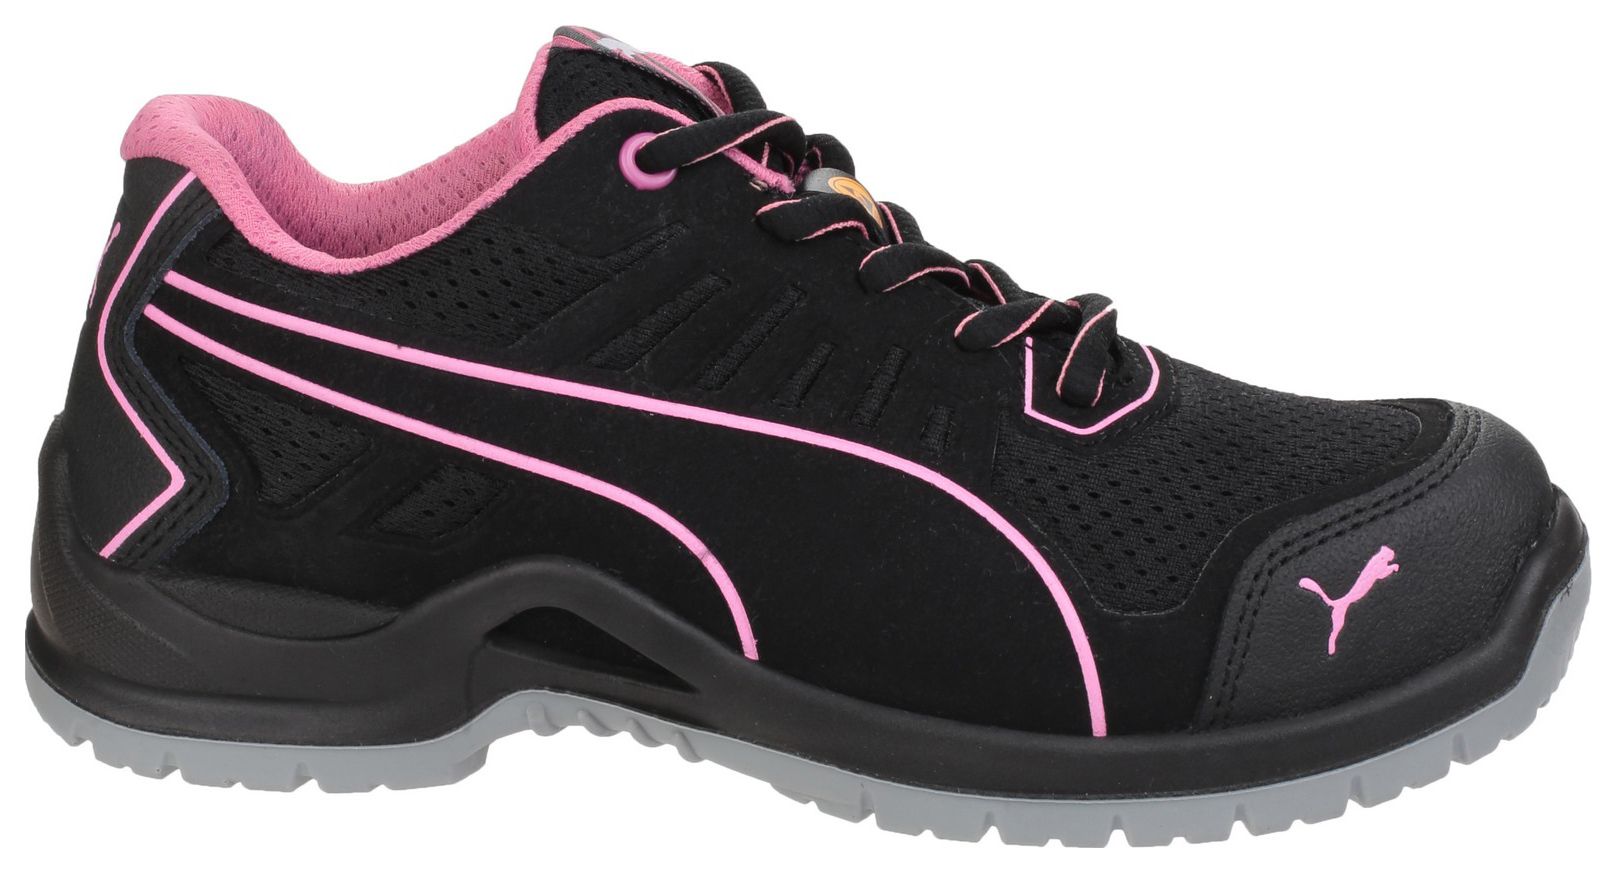 Puma Fuse Technic 644110 Womens Safety Trainers Black - Size 41